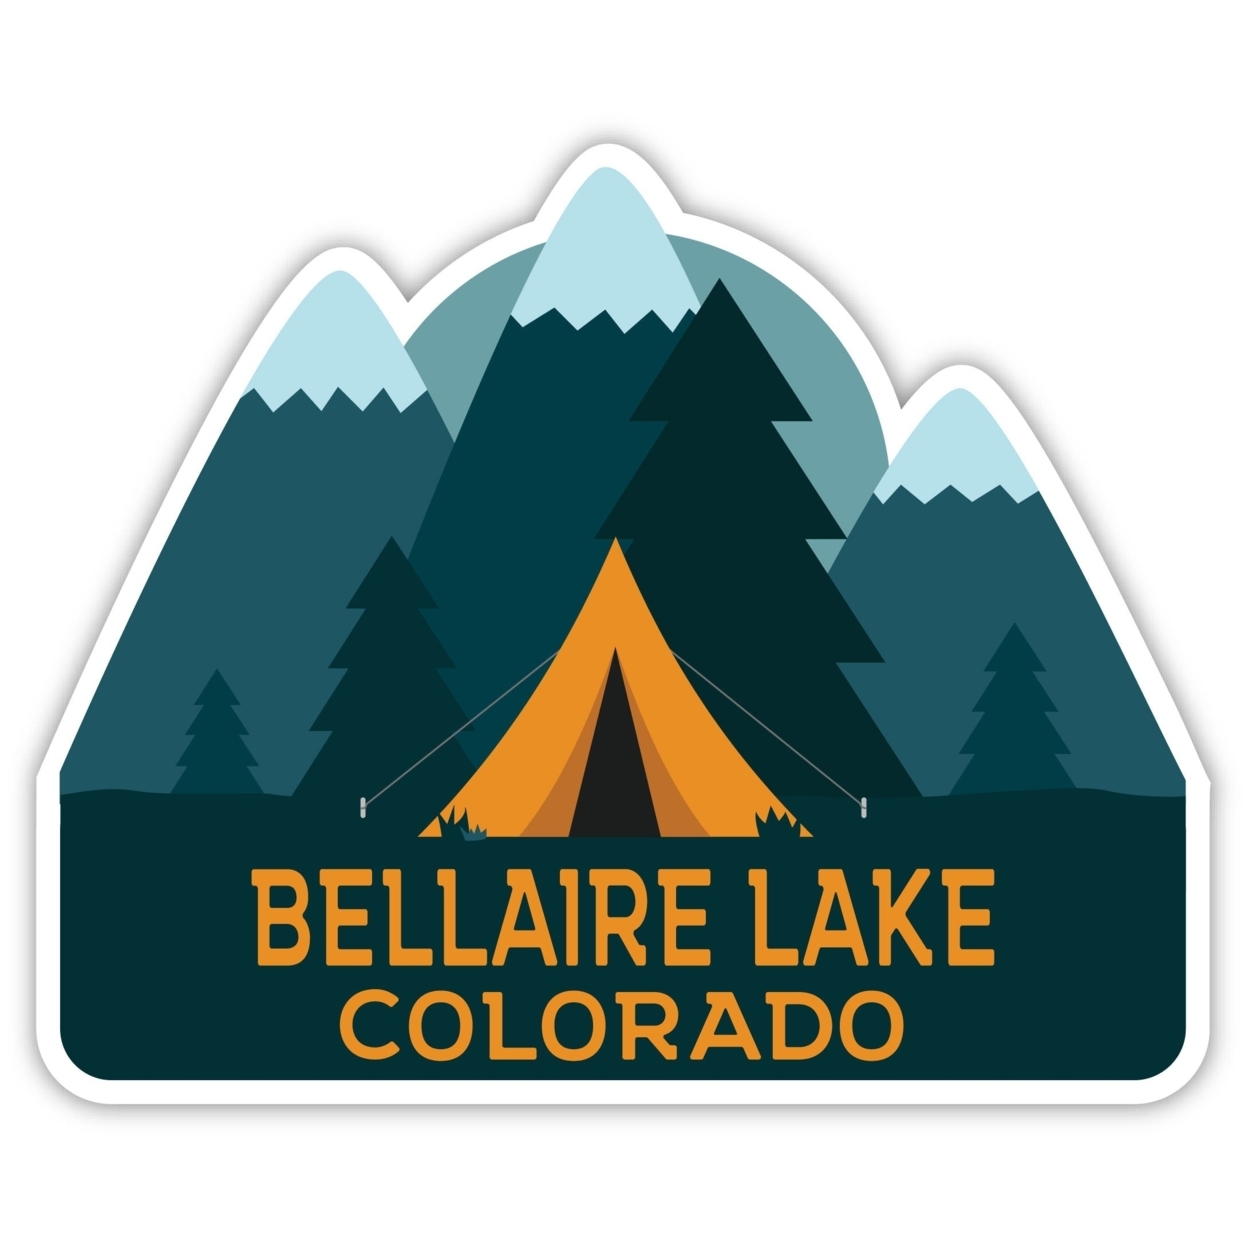 Bellaire Lake Colorado Souvenir Decorative Stickers (Choose Theme And Size) - 4-Pack, 4-Inch, Tent